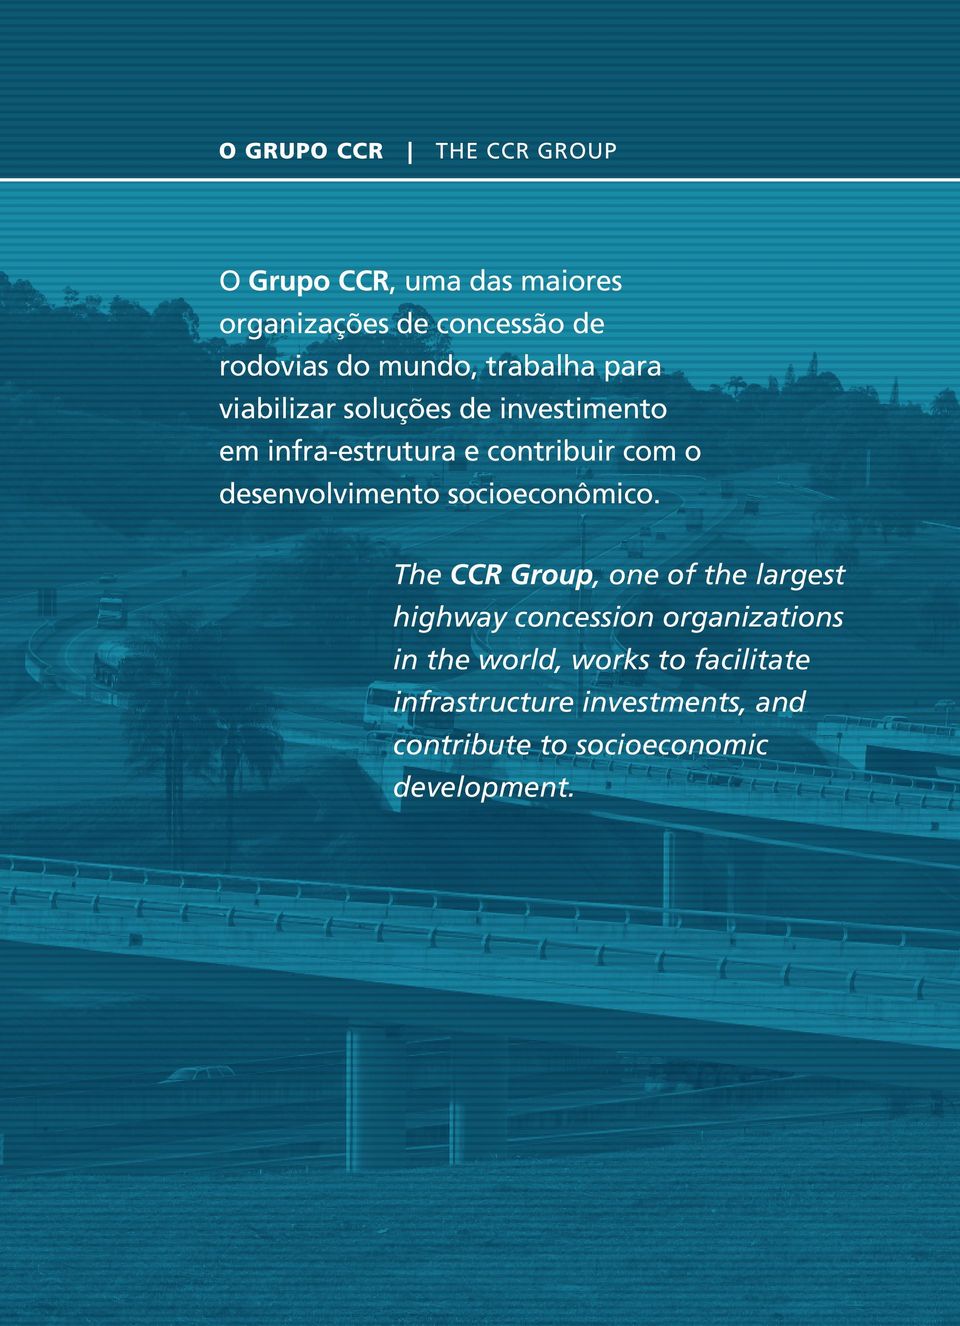 The CCR Group, one of the largest highway concession organizations in the world, works to facilitate